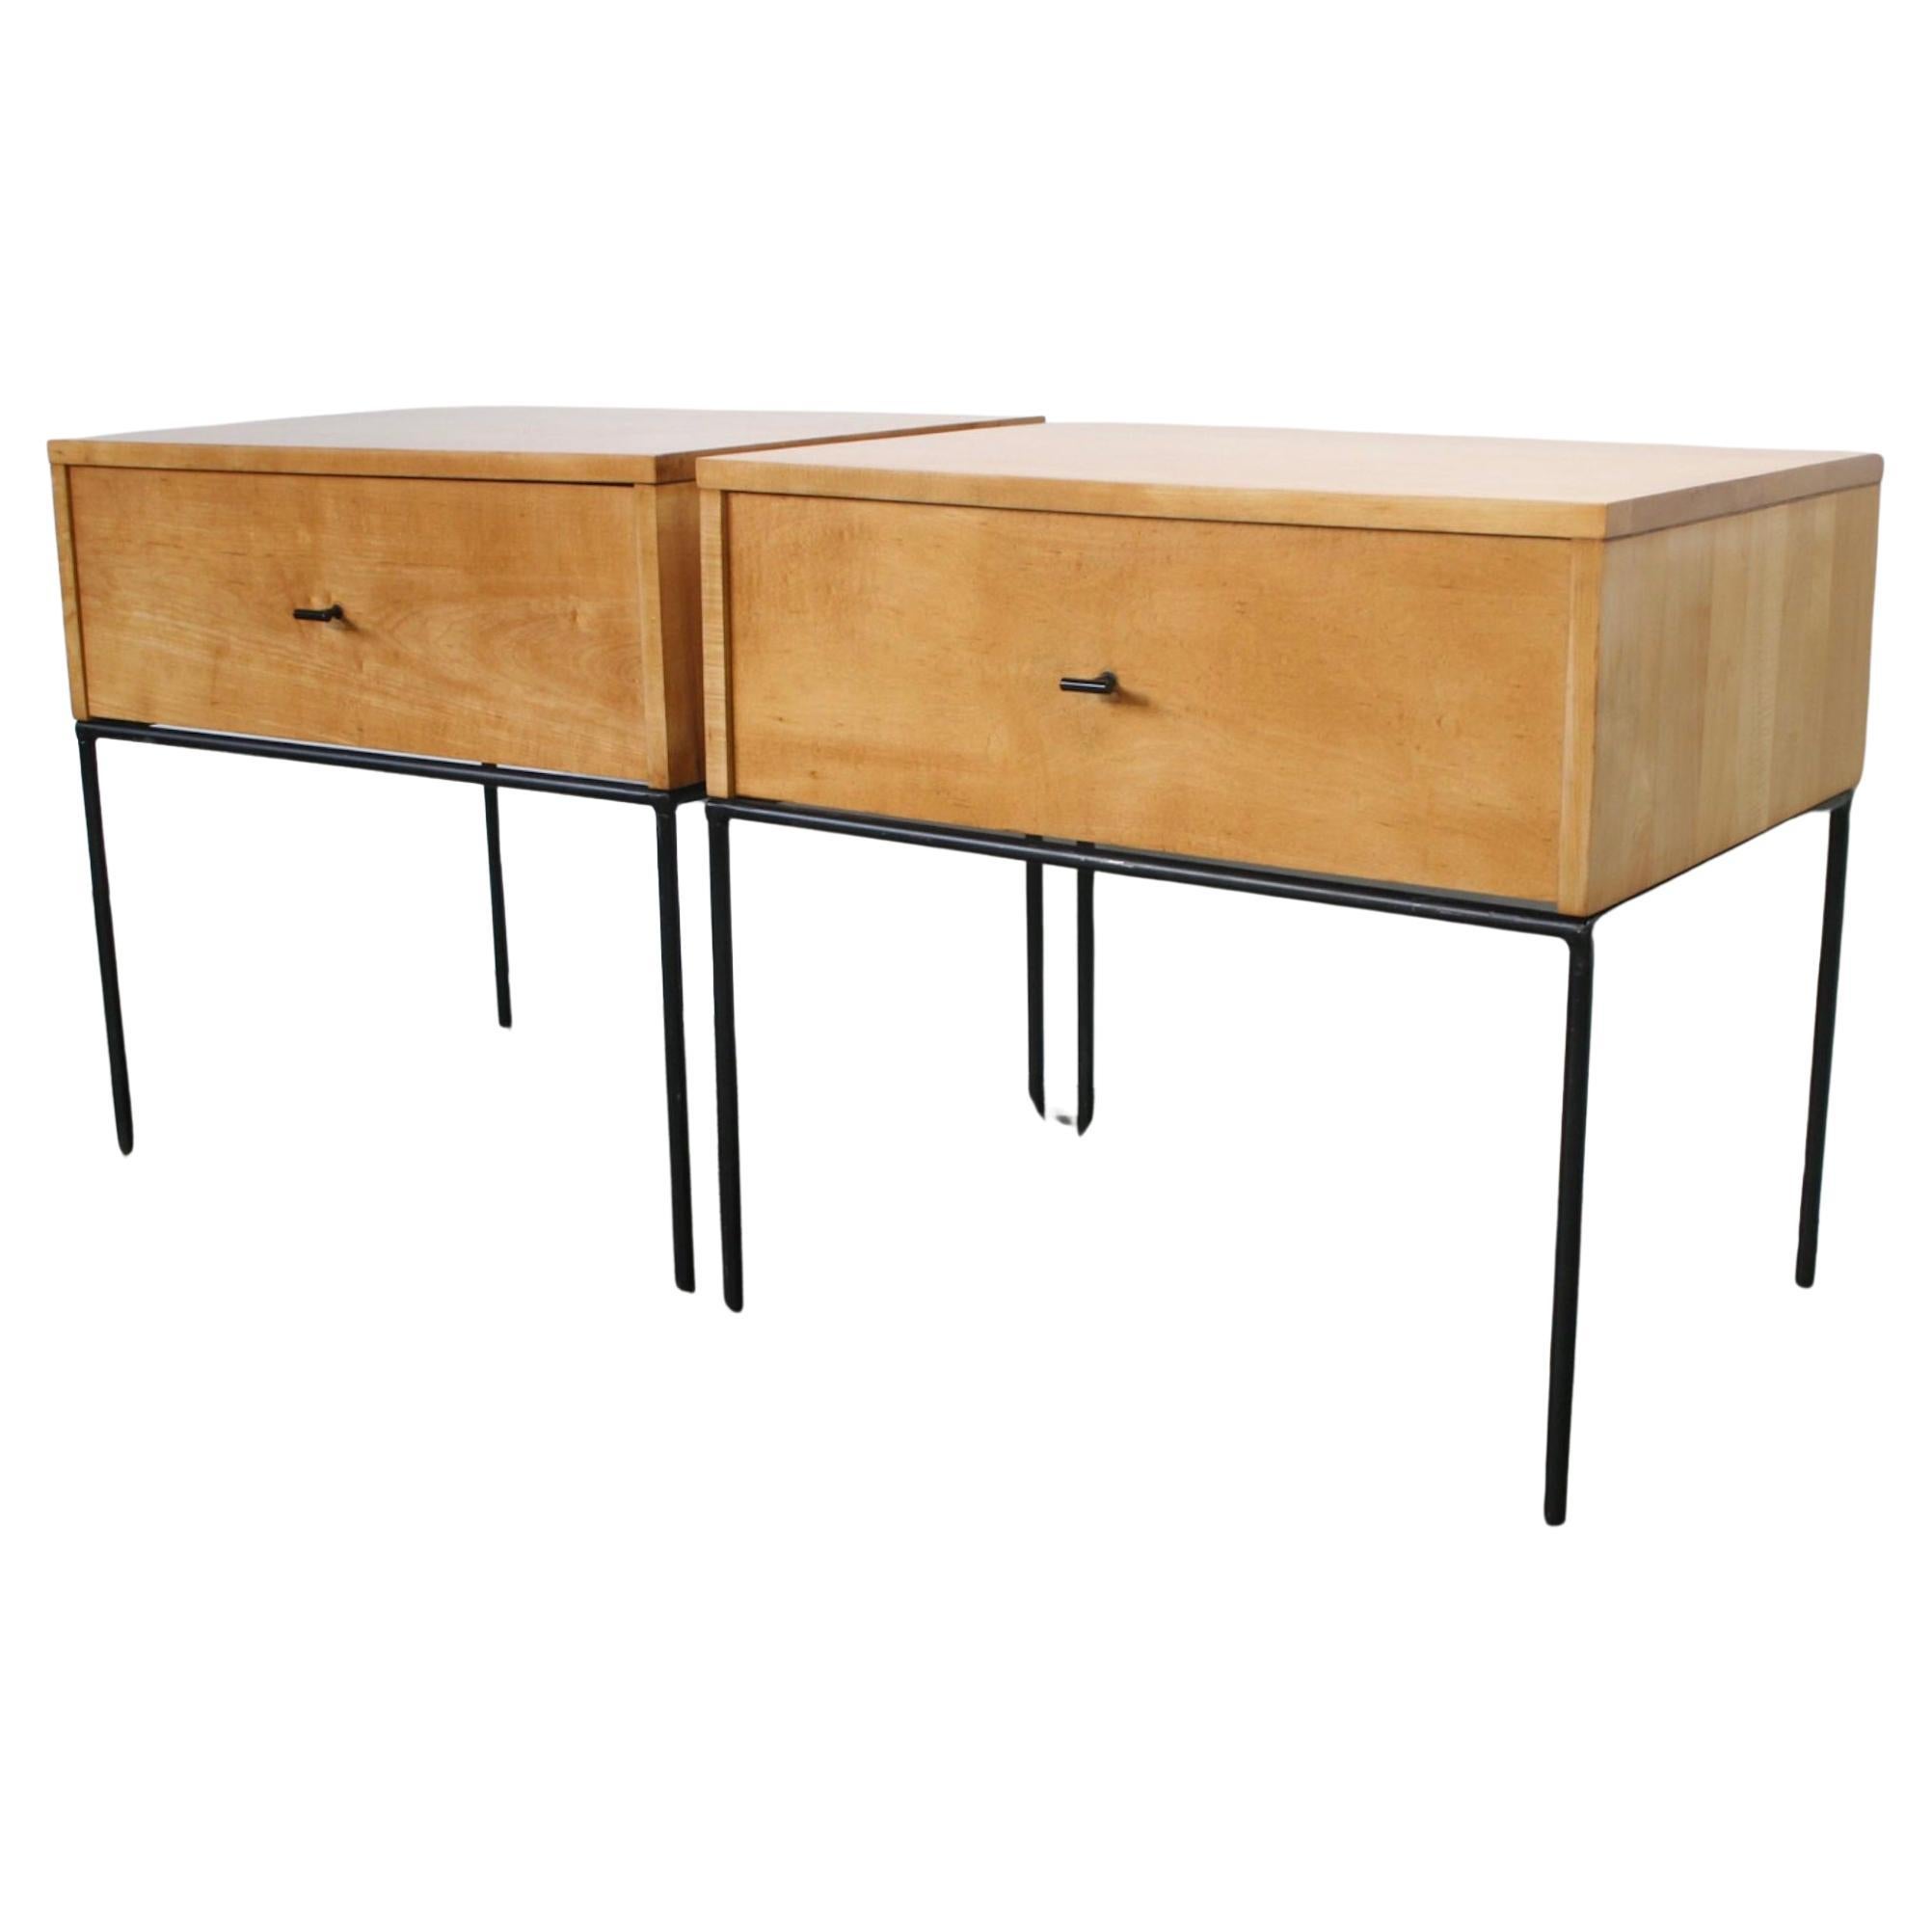 Beautiful pair of Paul McCobb planner group #1500 maple nightstands end tables single drawer. Black T pull knobs. Blonde finish on maple. Very modern designed pair of nightstands with iron base with 4 legs. All solid maple.  Designer Paul McCobb.